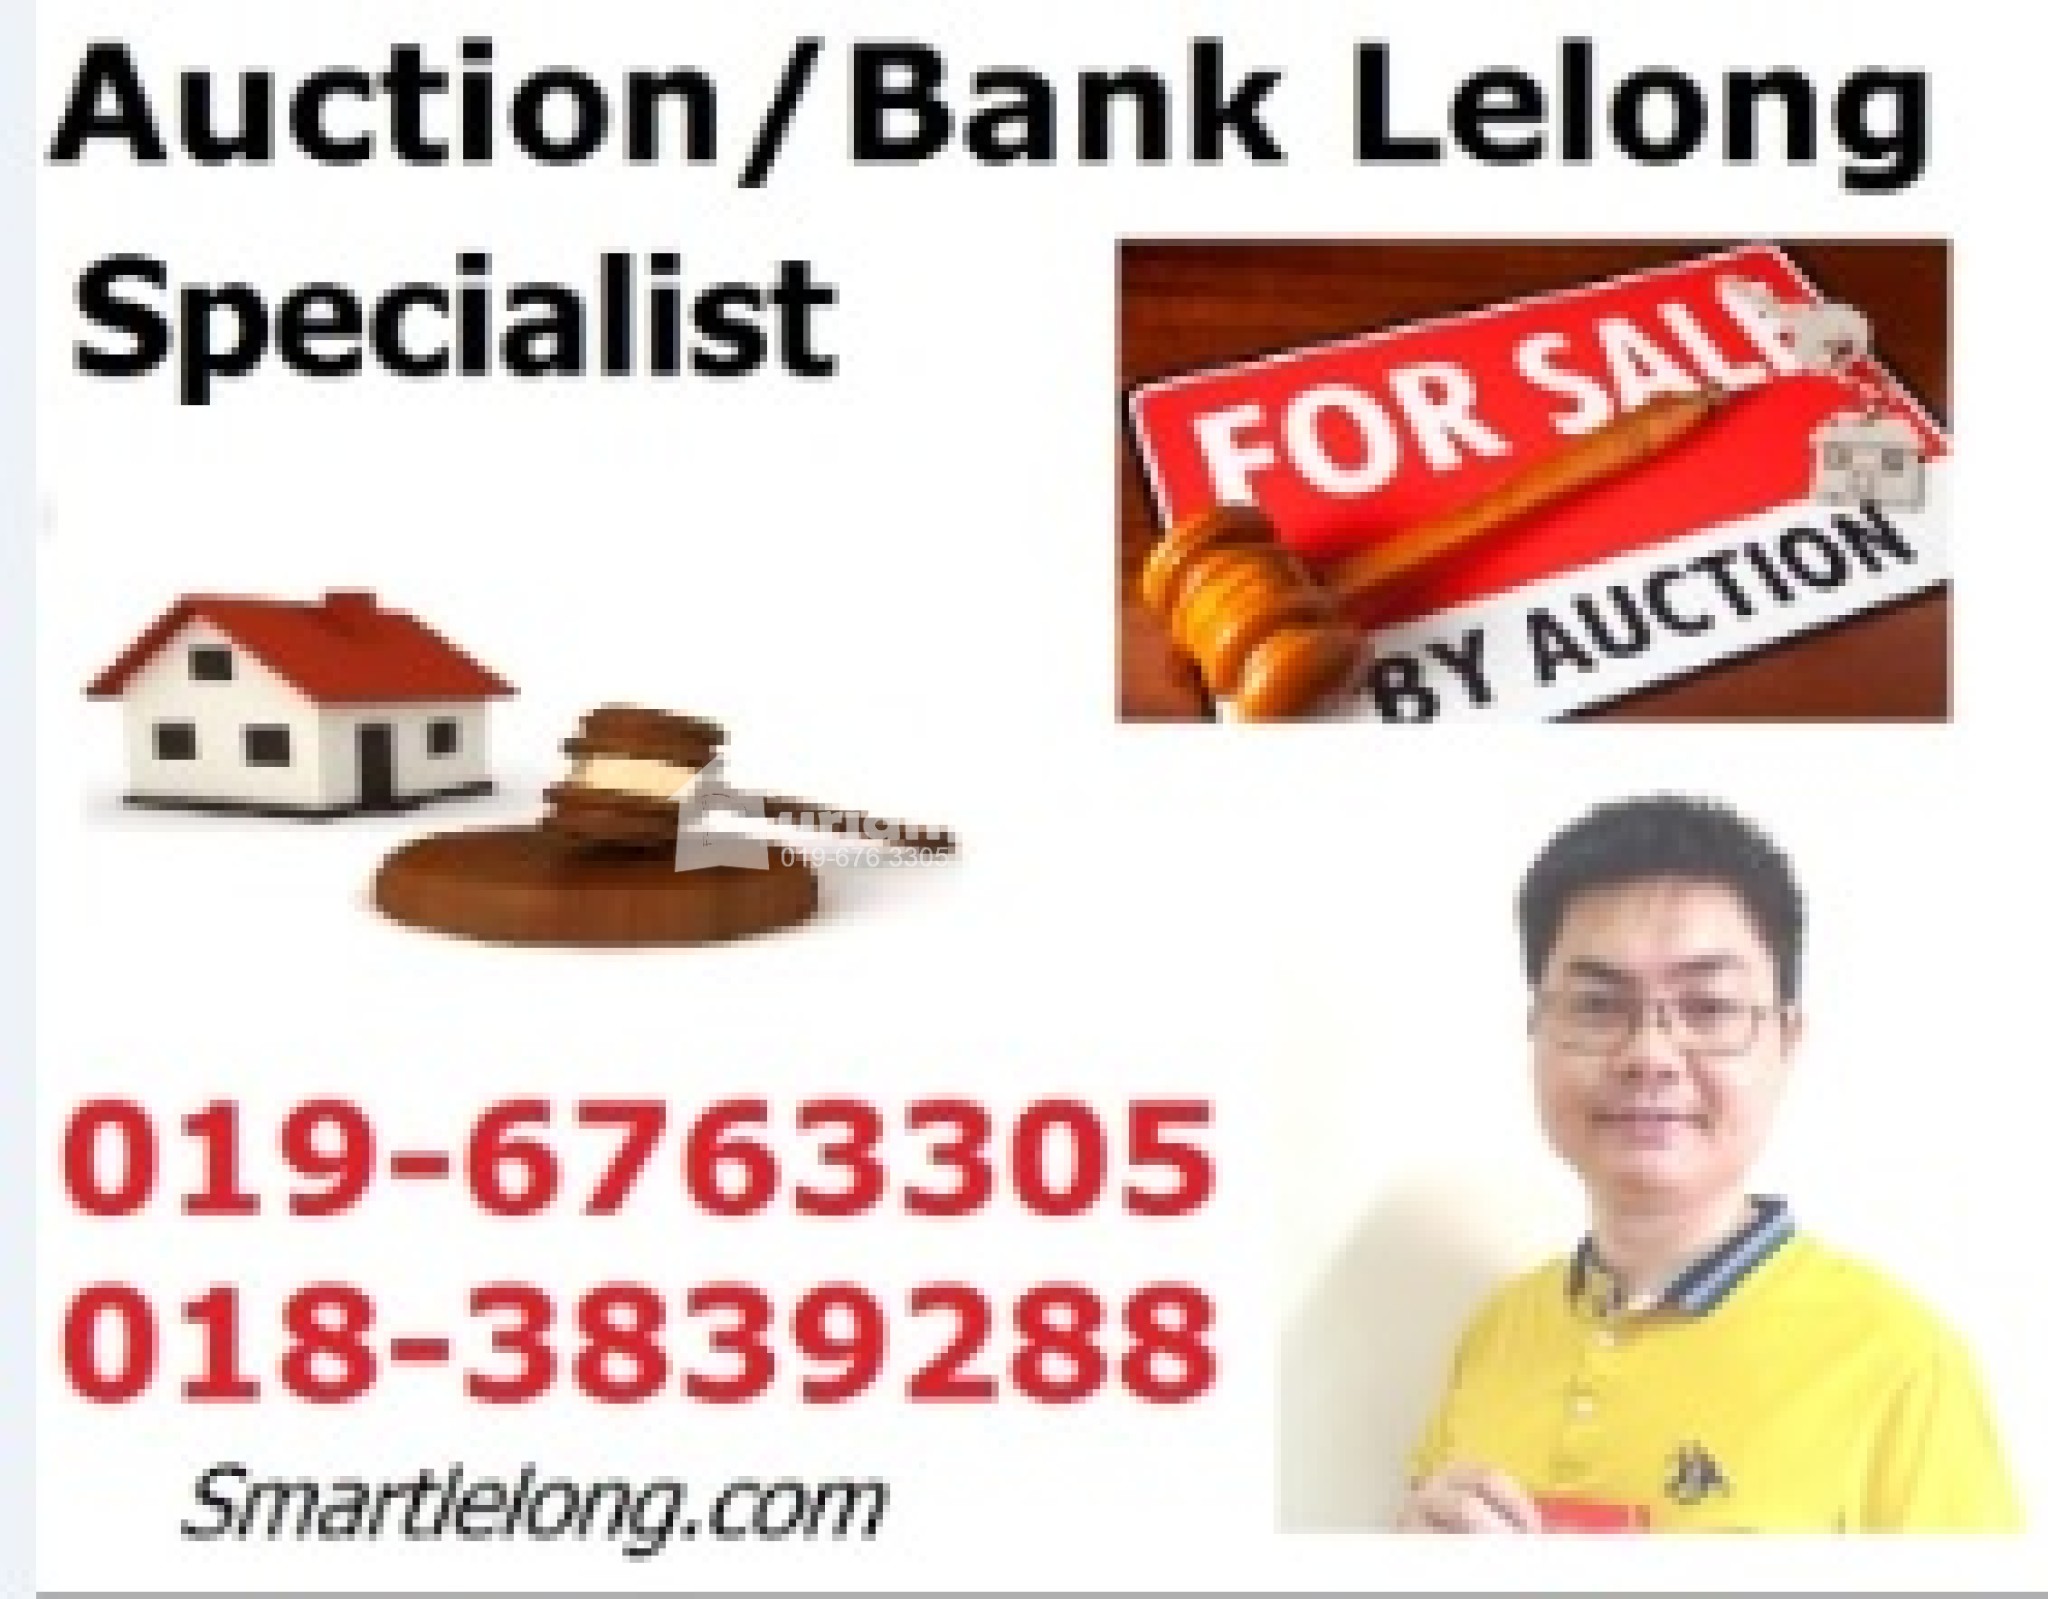 Terrace House For Auction at Taman Cheng Baru